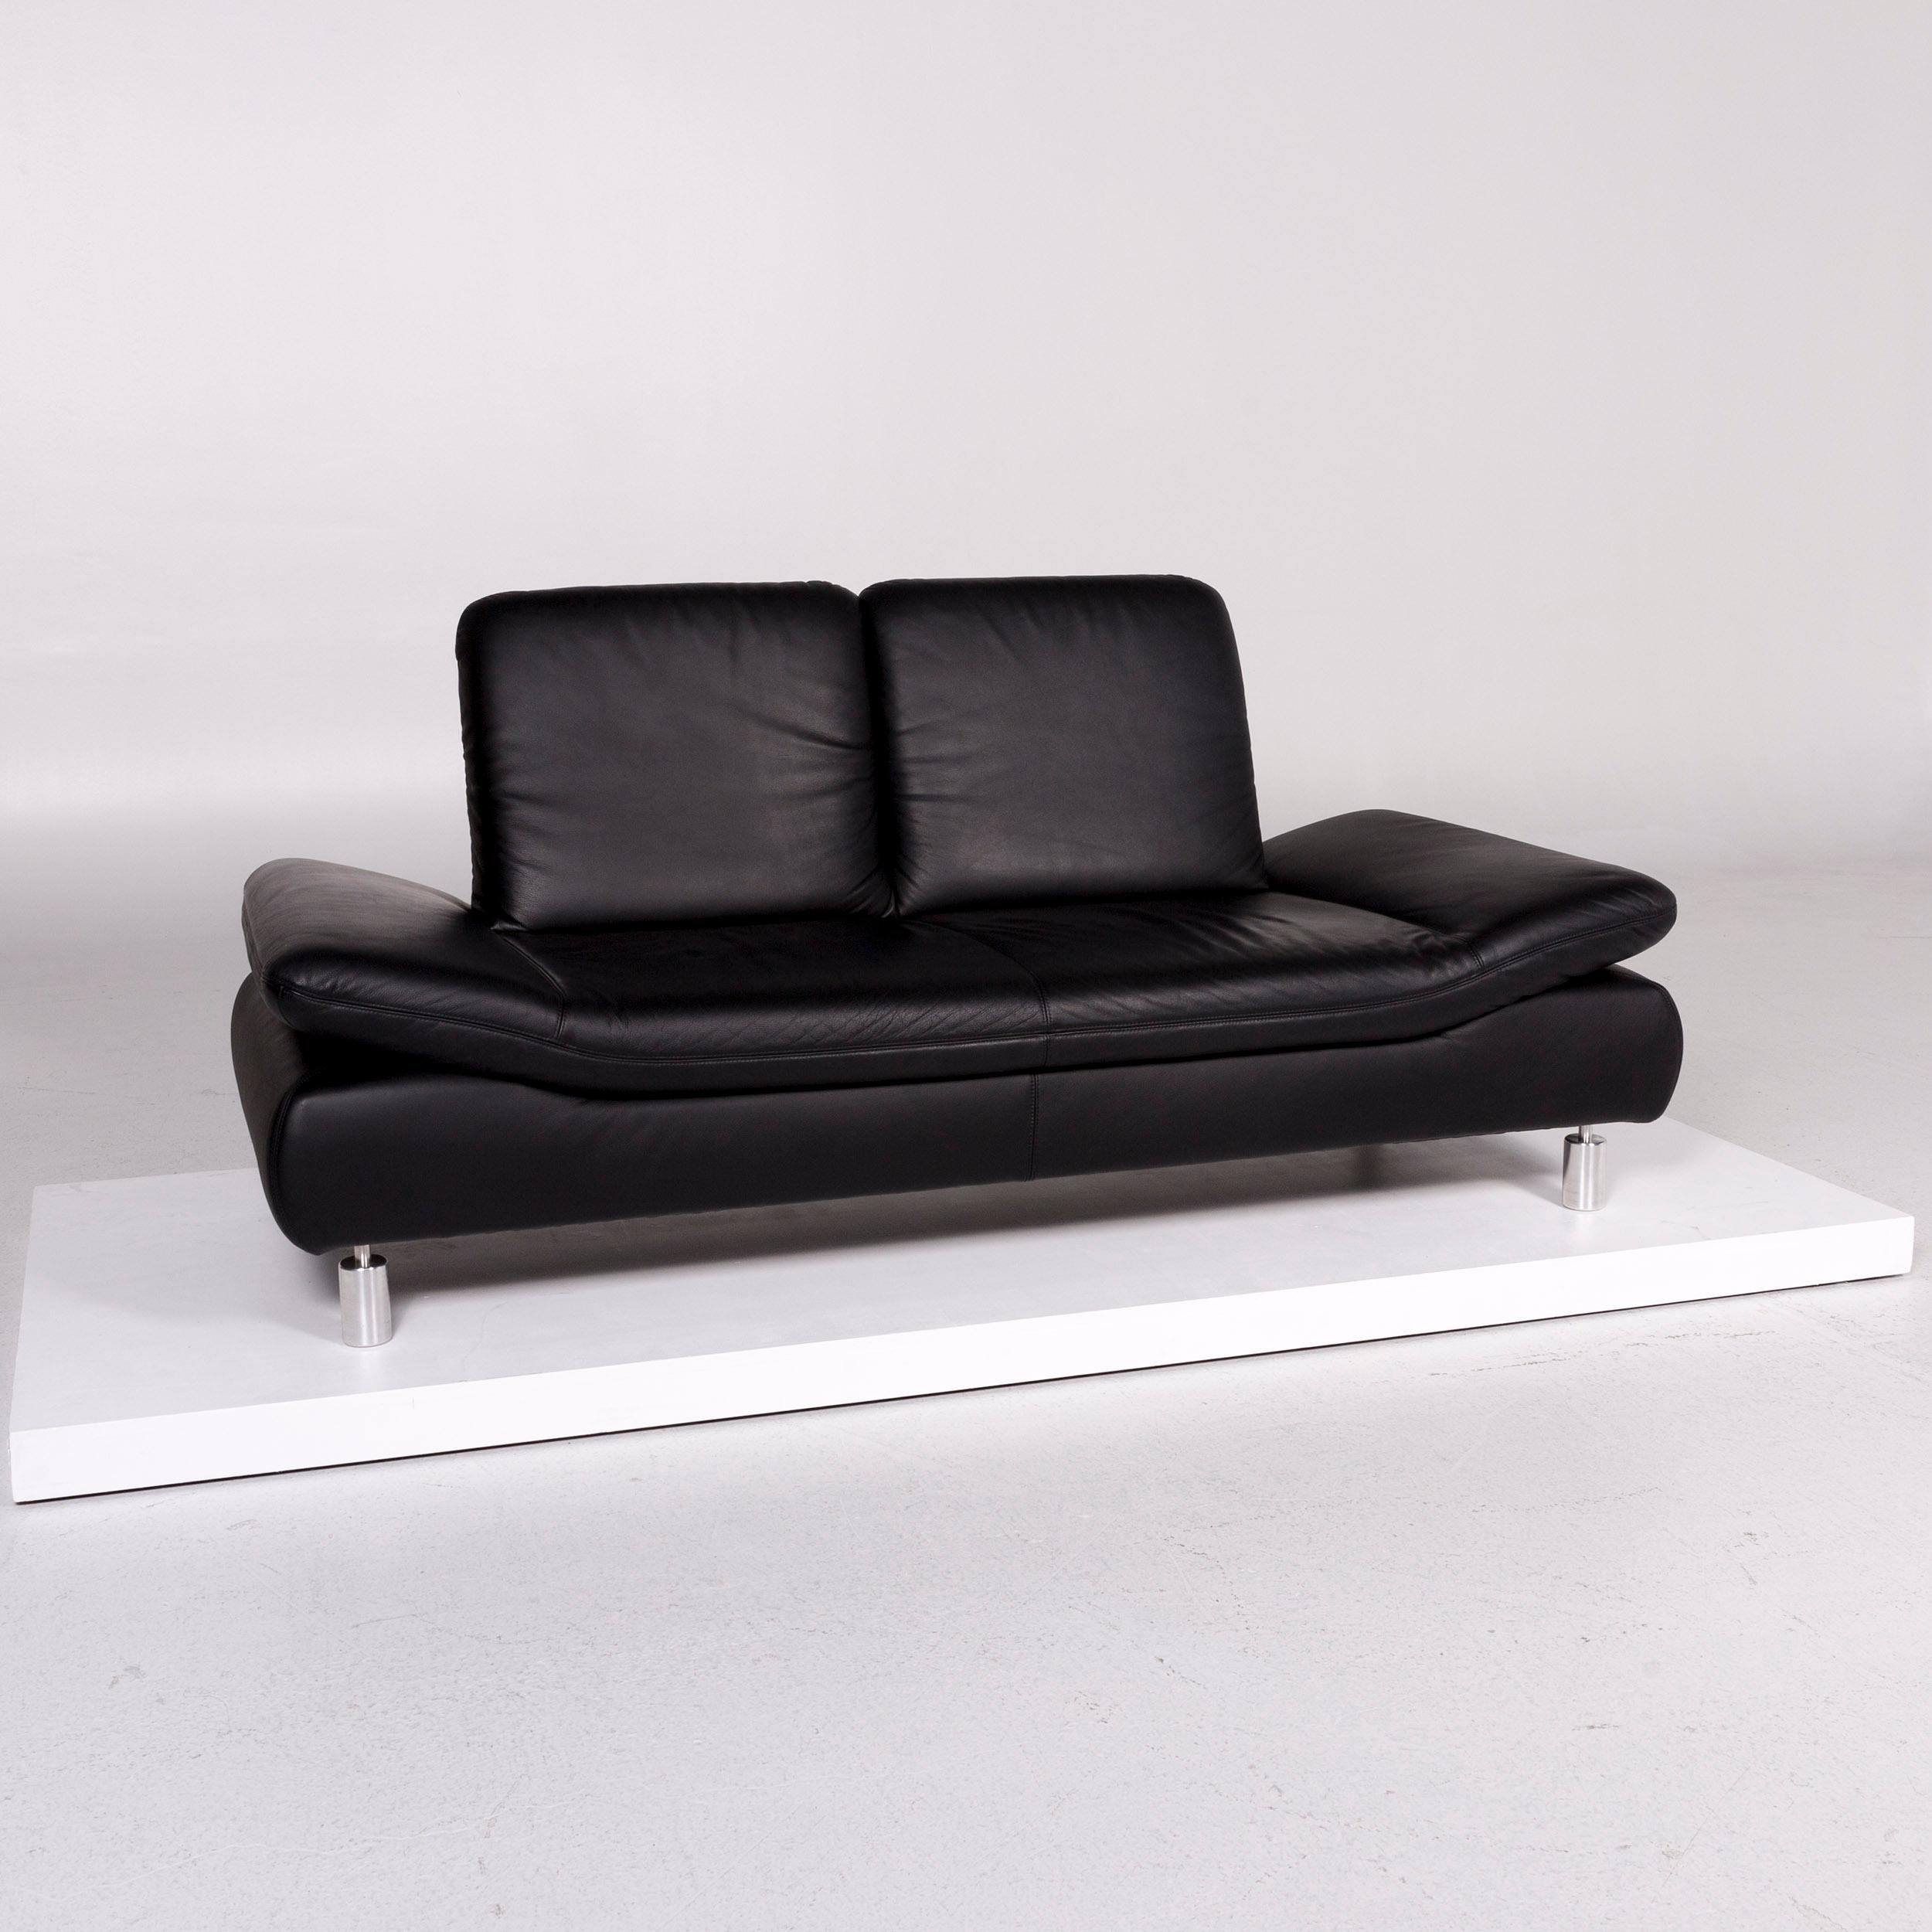 We bring to you a Koinor Rivoli leather sofa set black 1 three-seat 1 two-seat.
  
 

 Product measurements in centimeters:
 

Depth 93
Width 237
Height 87
Seat-height 42
Rest-height 47
Seat-depth 59
Seat-width 153
Back-height 45.